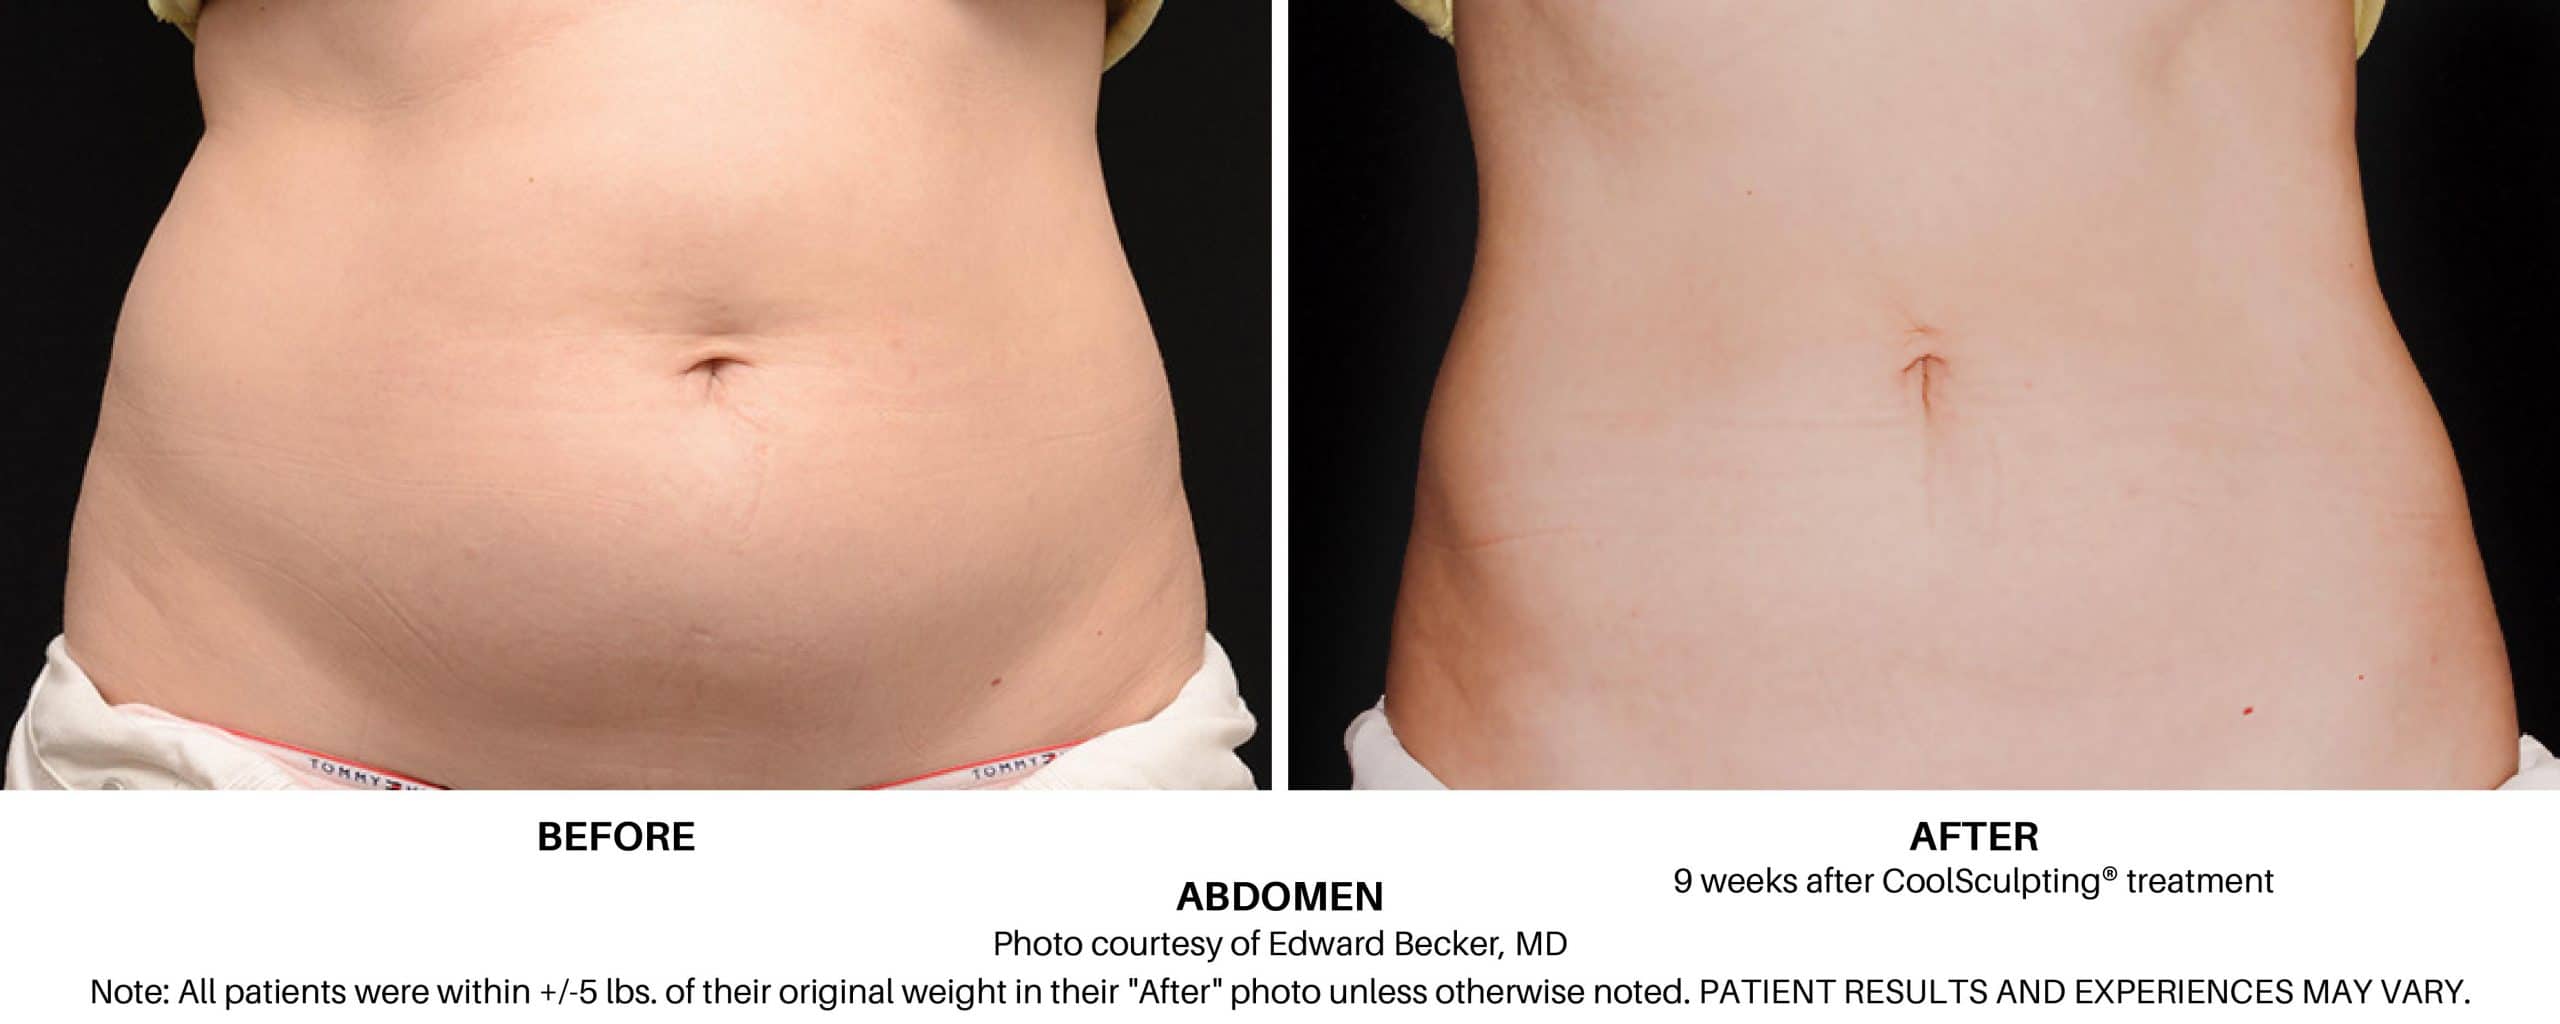 CoolSculpting Elite Before and After Pictures